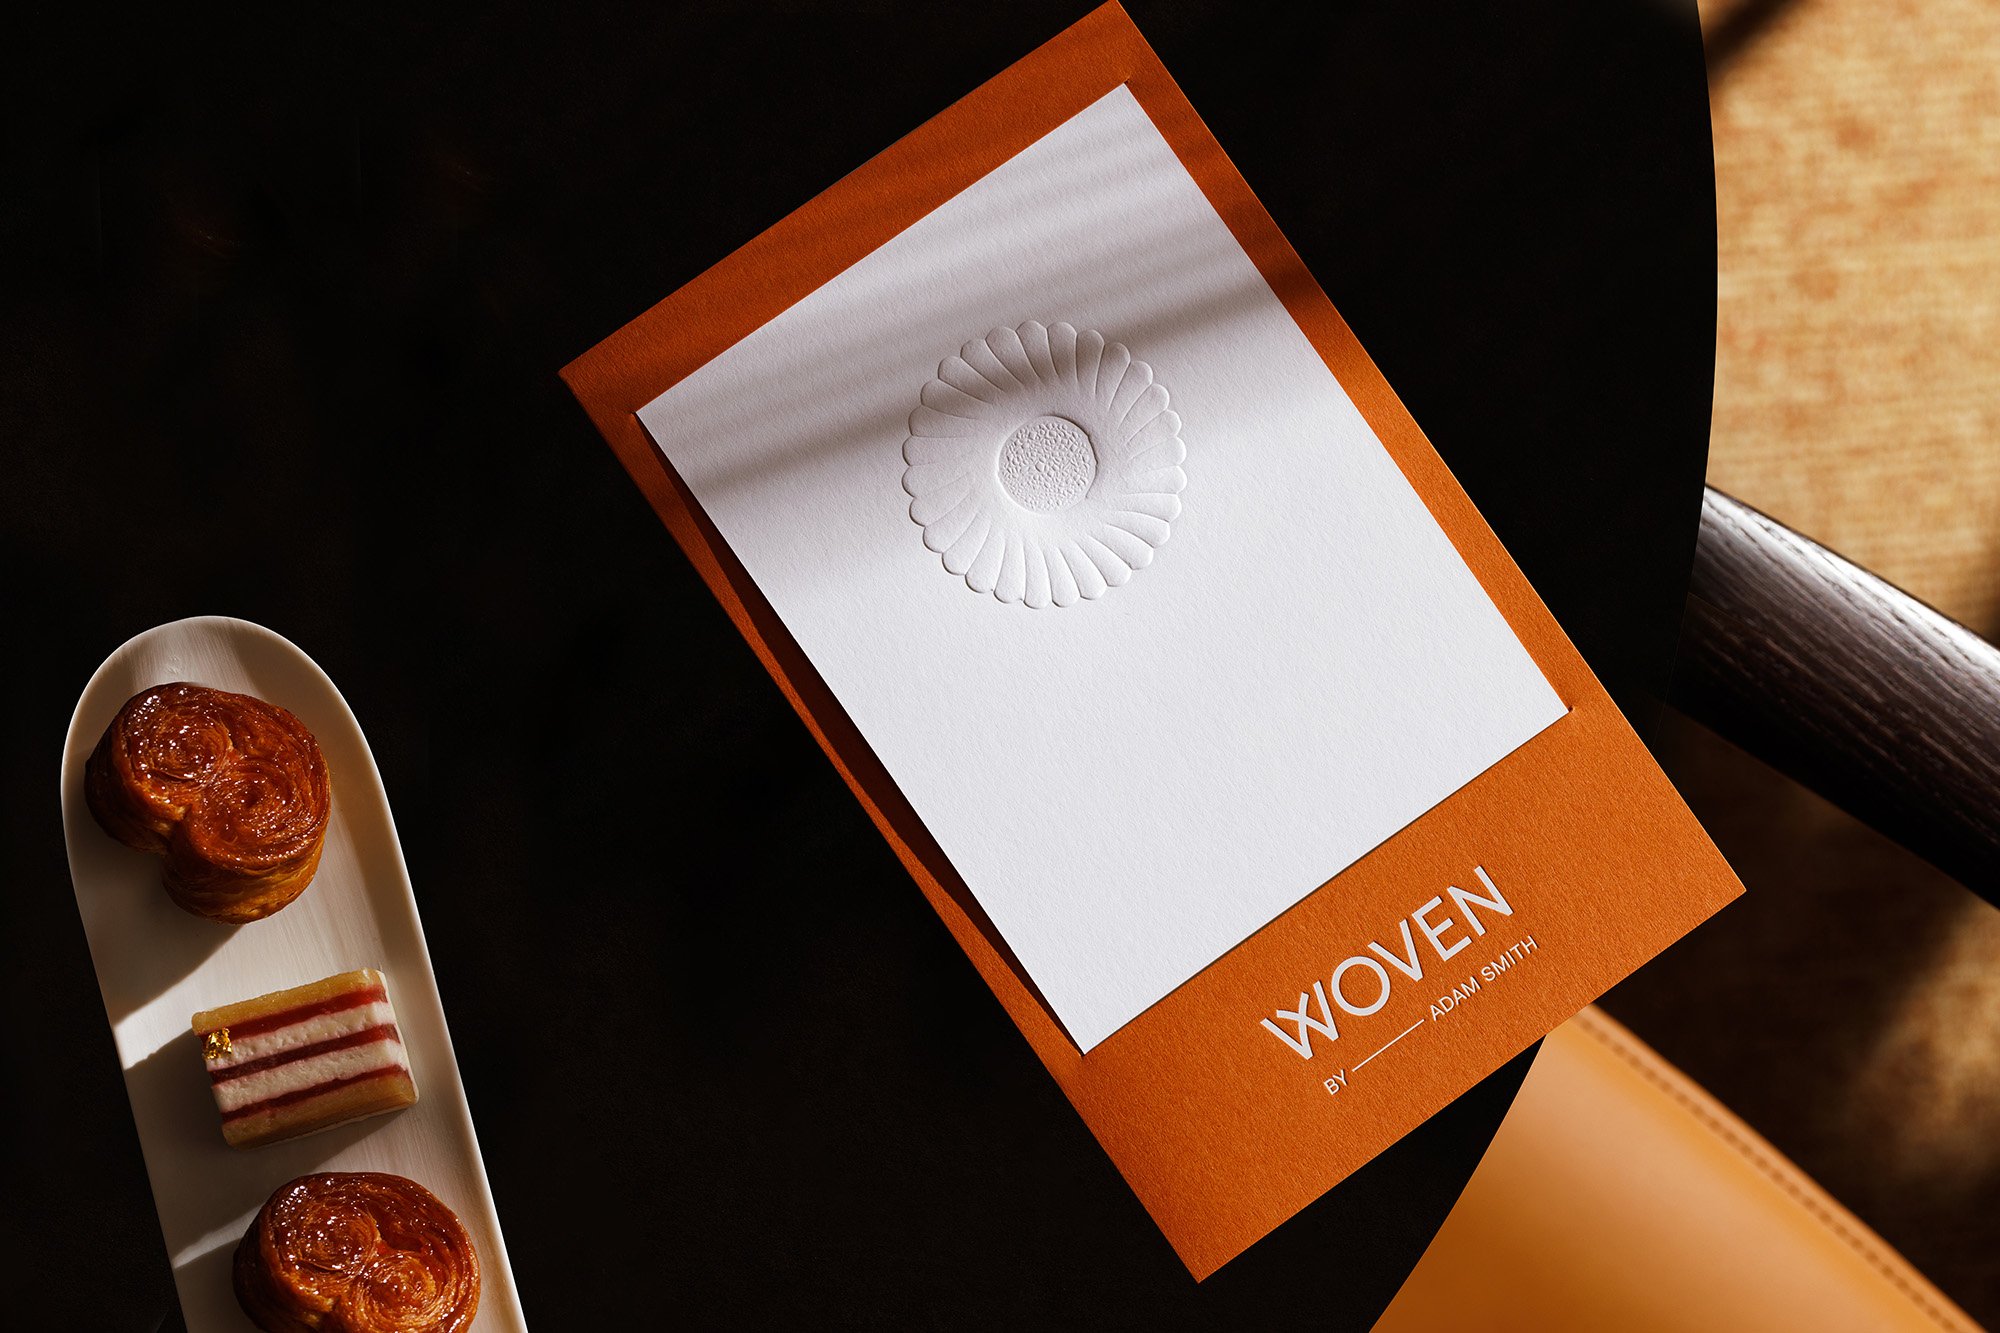 Logotype, signage and menu design for Woven, a Michelin star restaurant owned by the Dorchester Collection